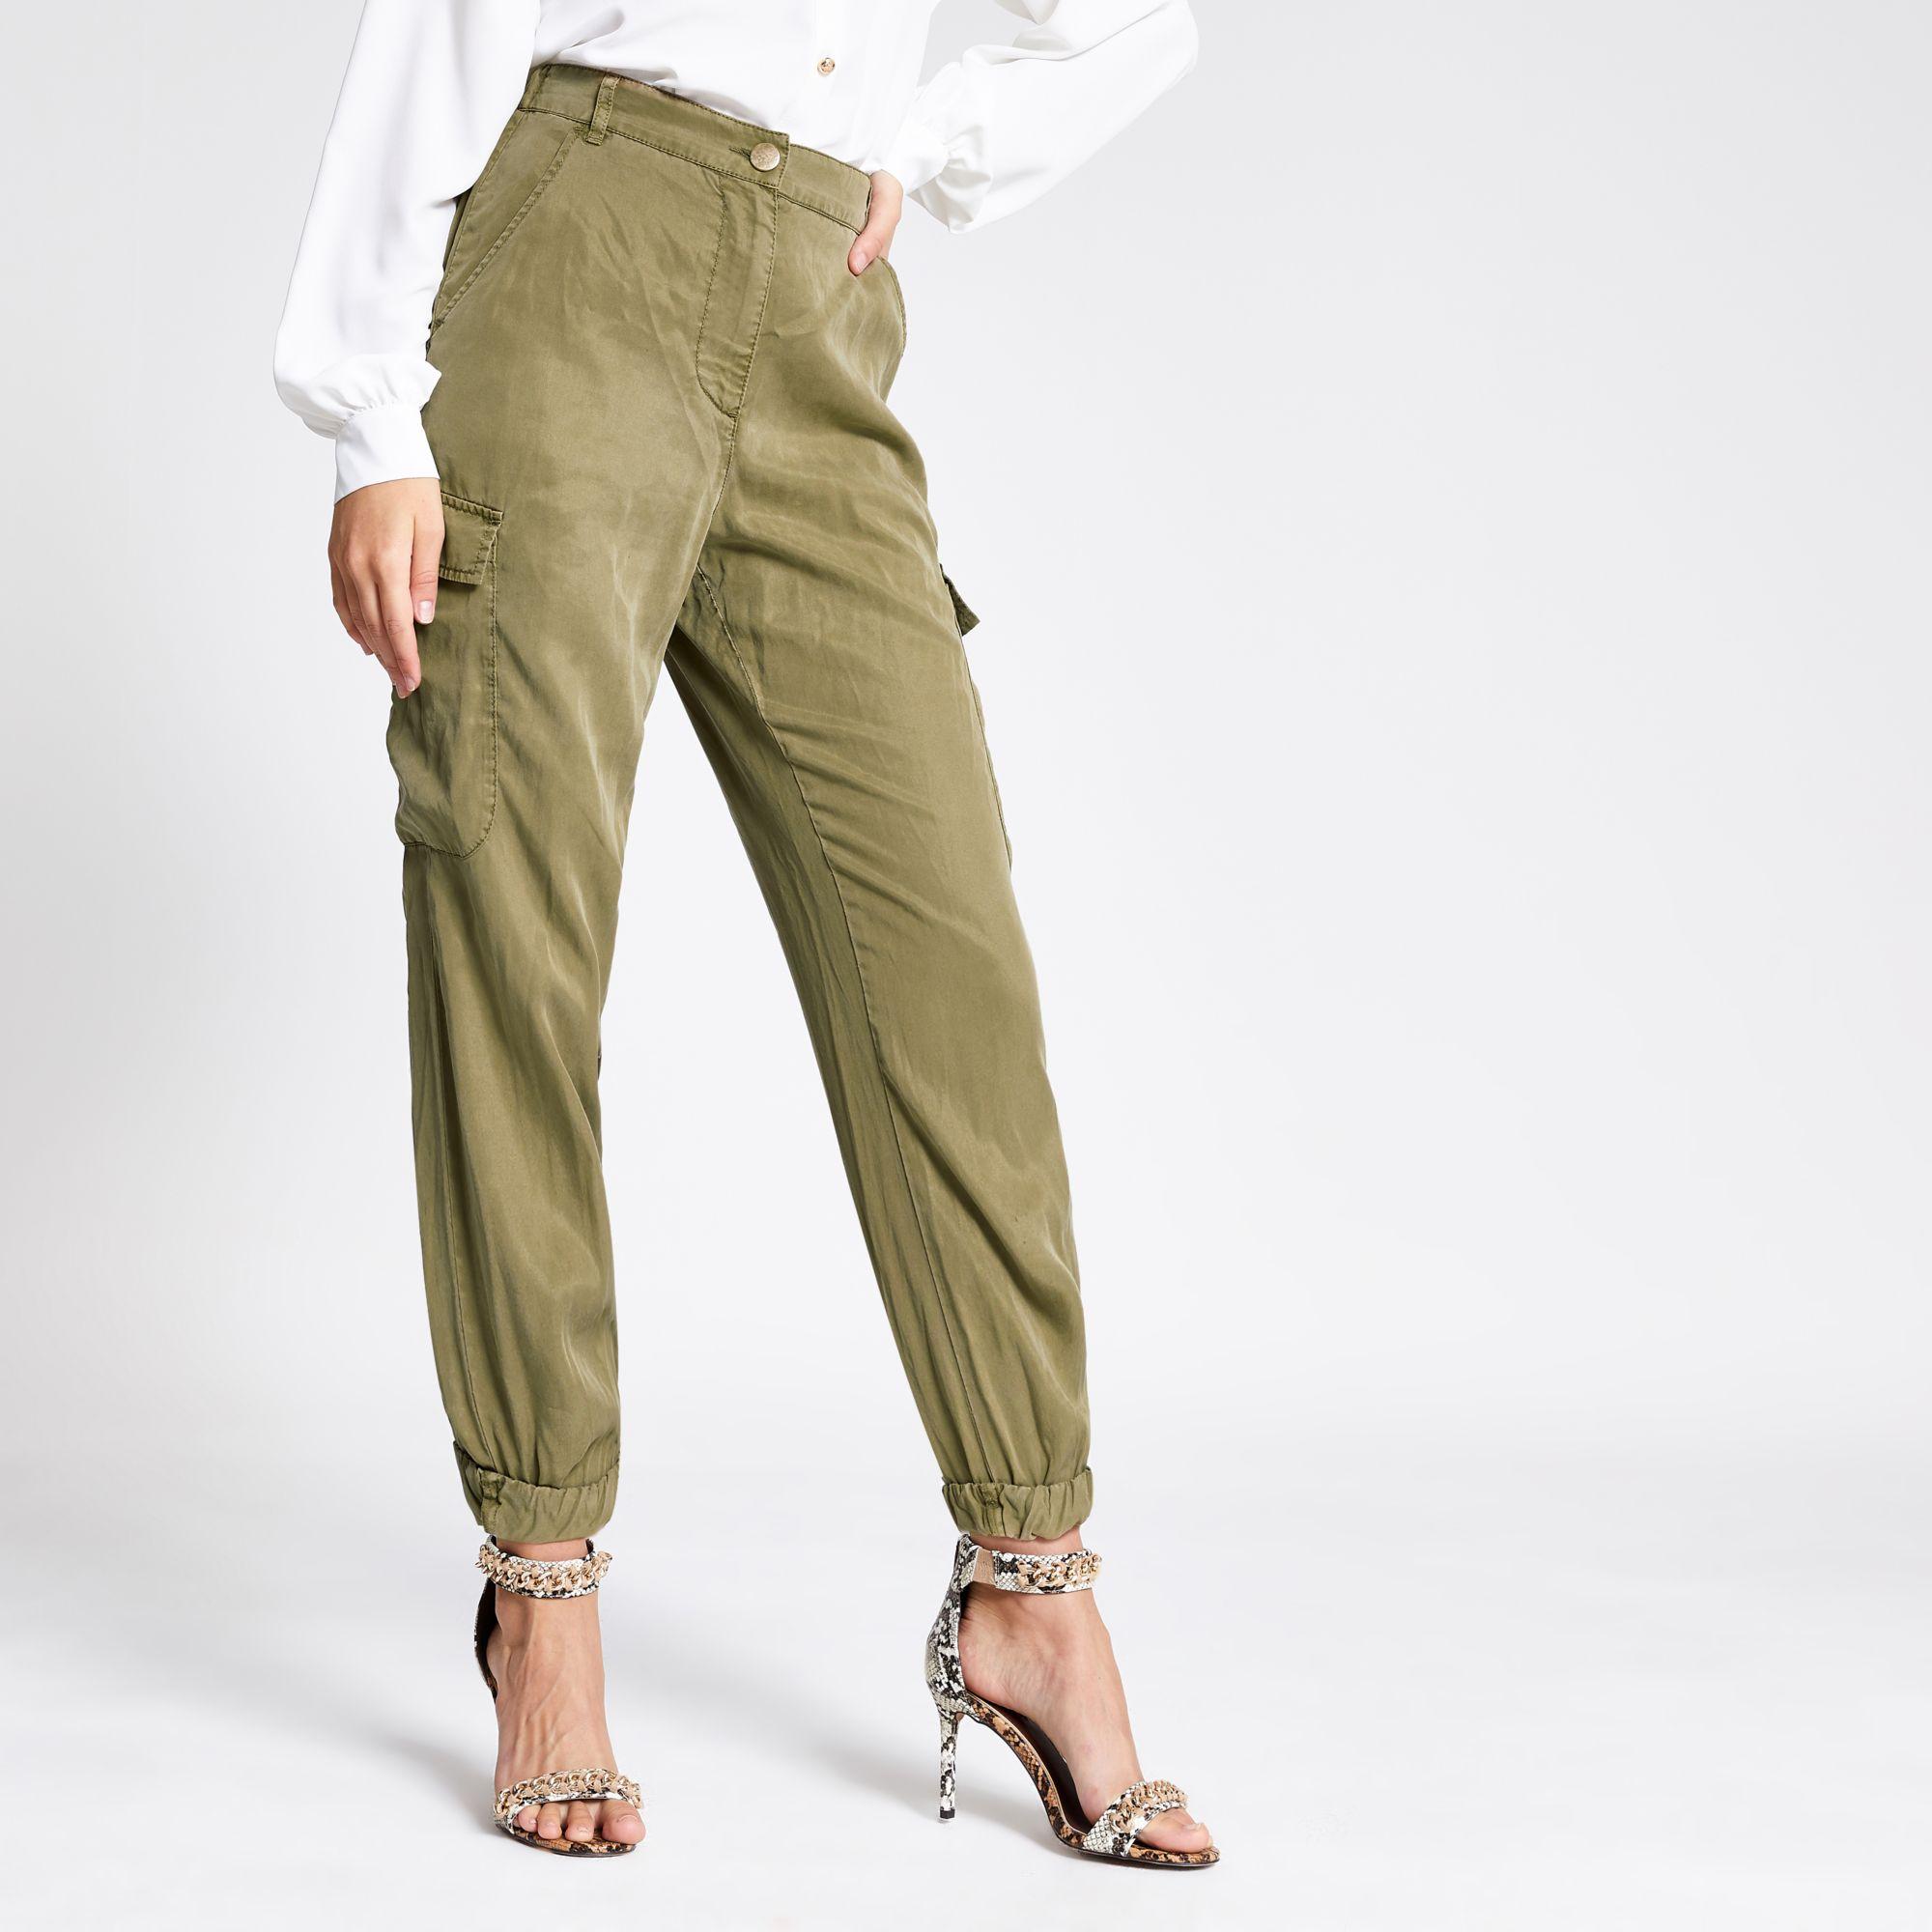 River Island Cropped Cargo Trousers in Khaki (Green) - Lyst